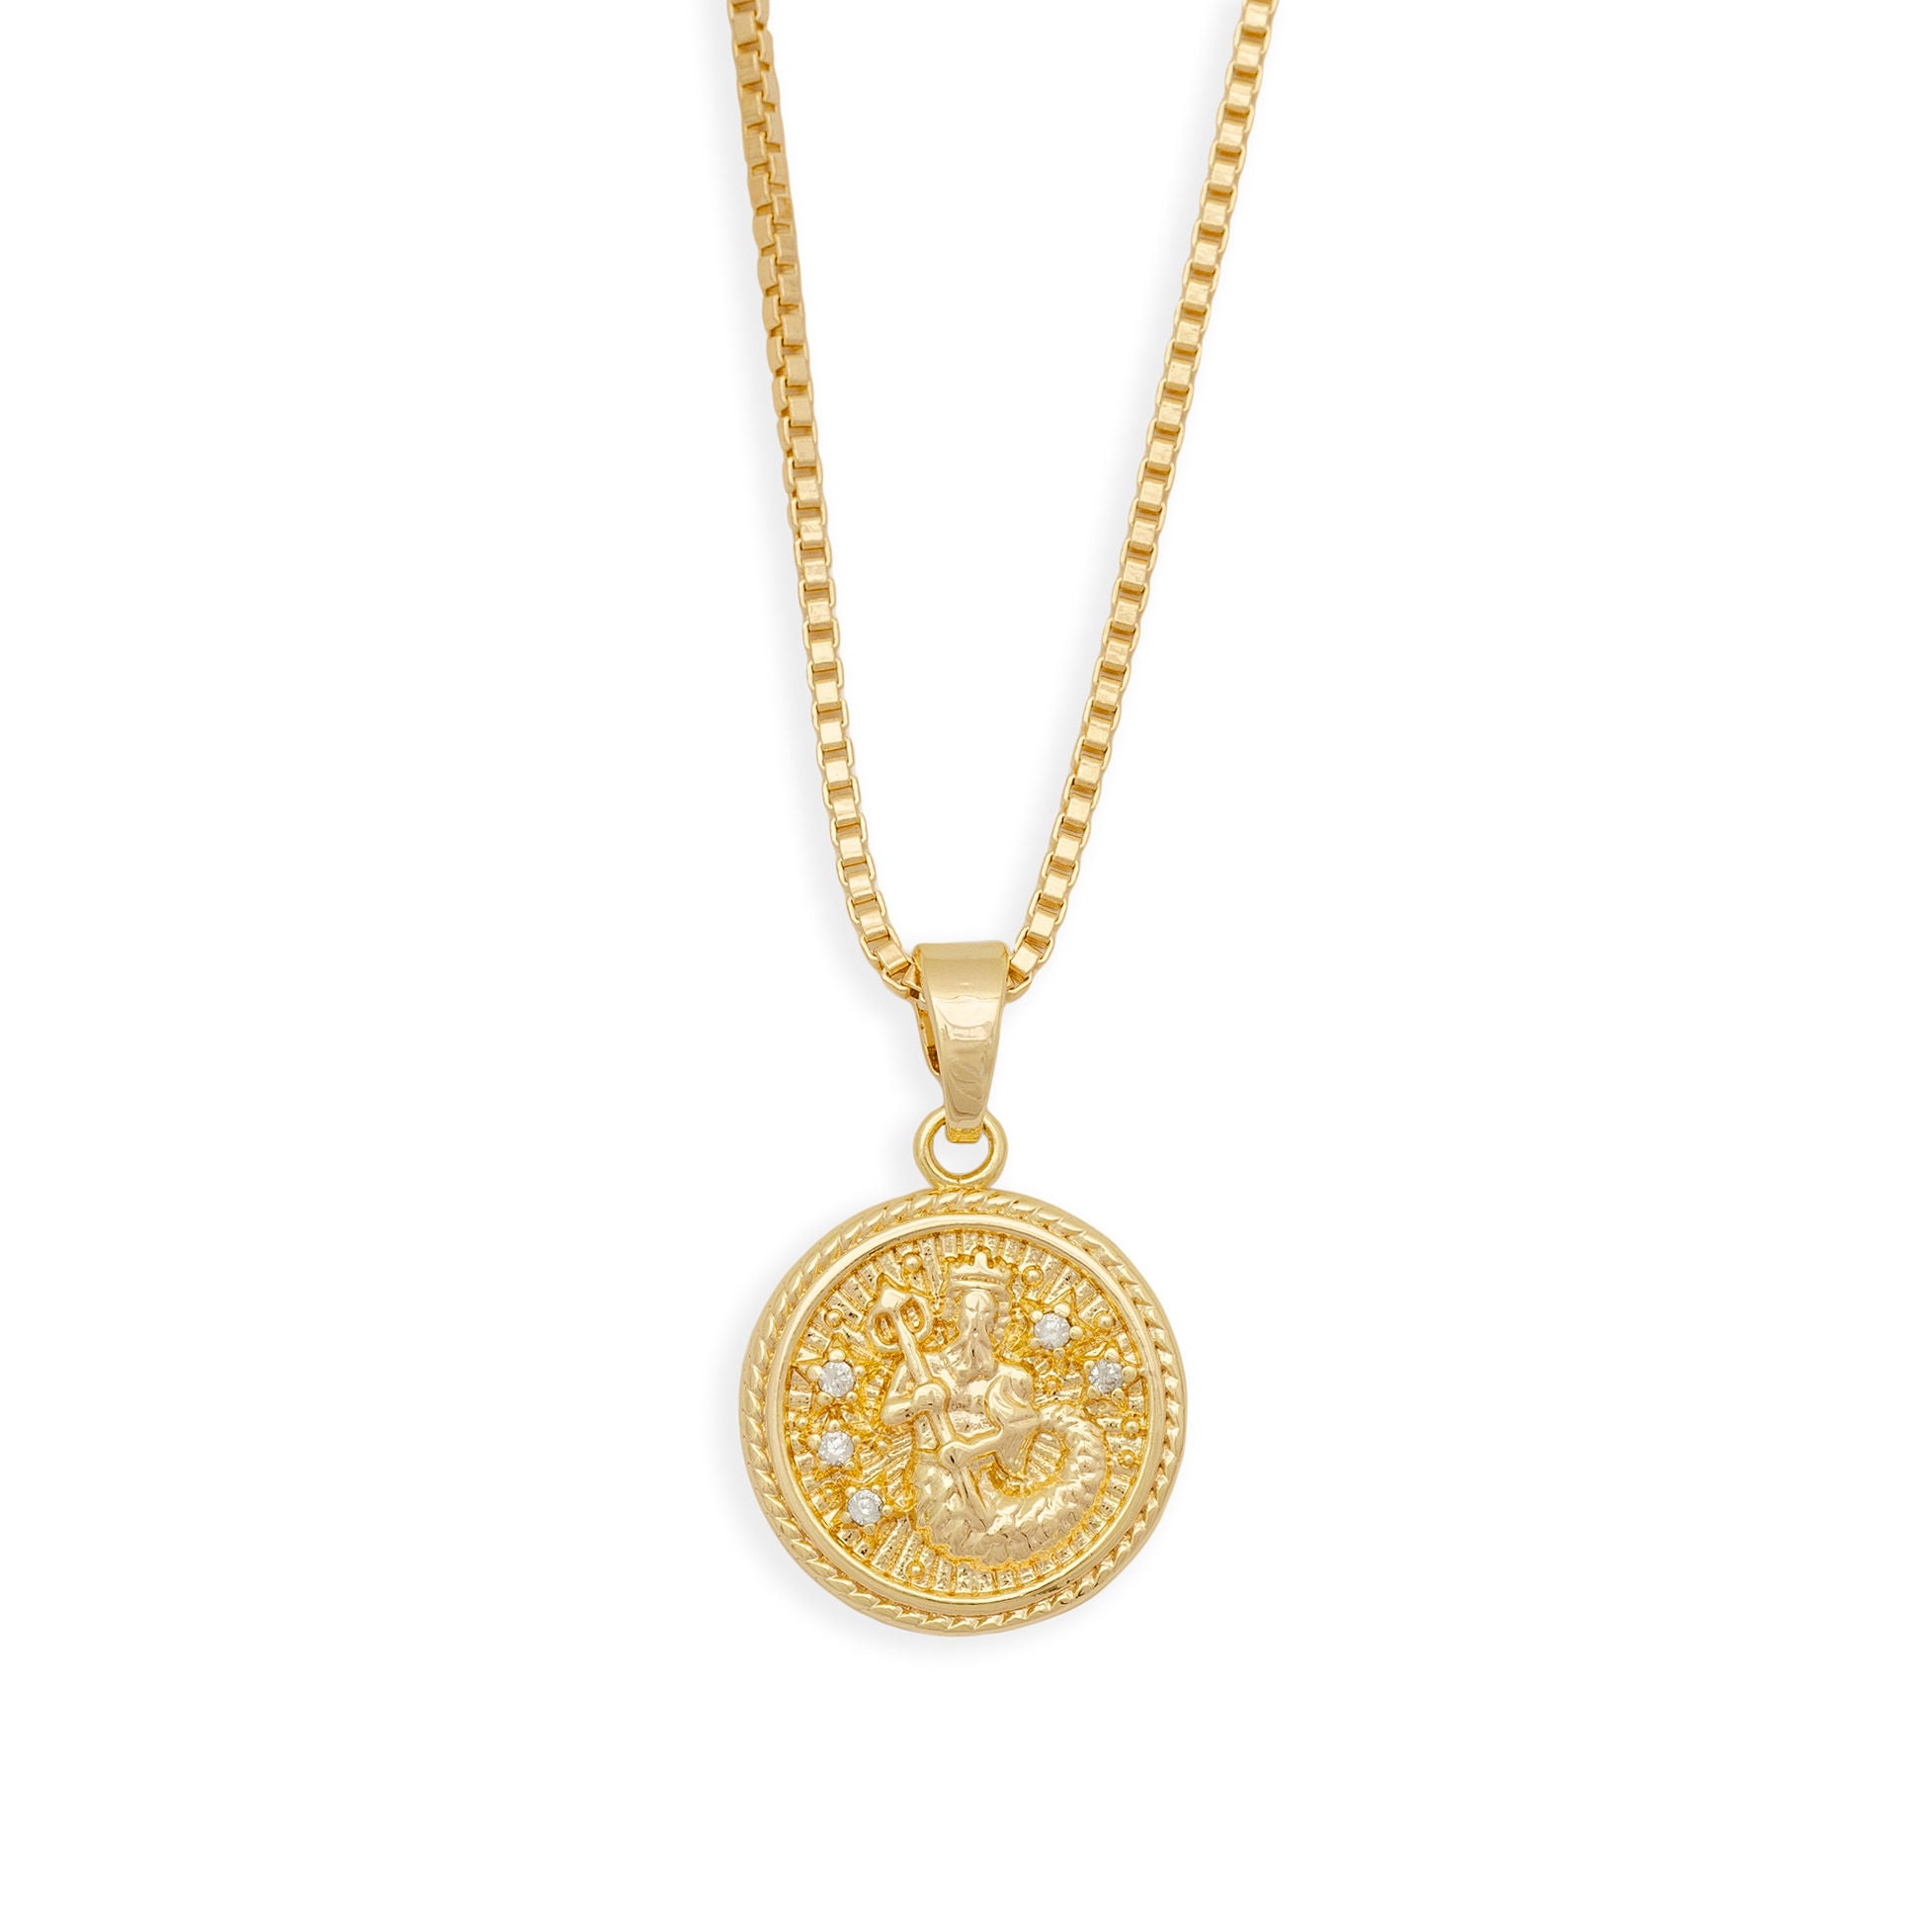 In the Stars Zodiac Necklace - Aquarius from Erin Fader Jewelry